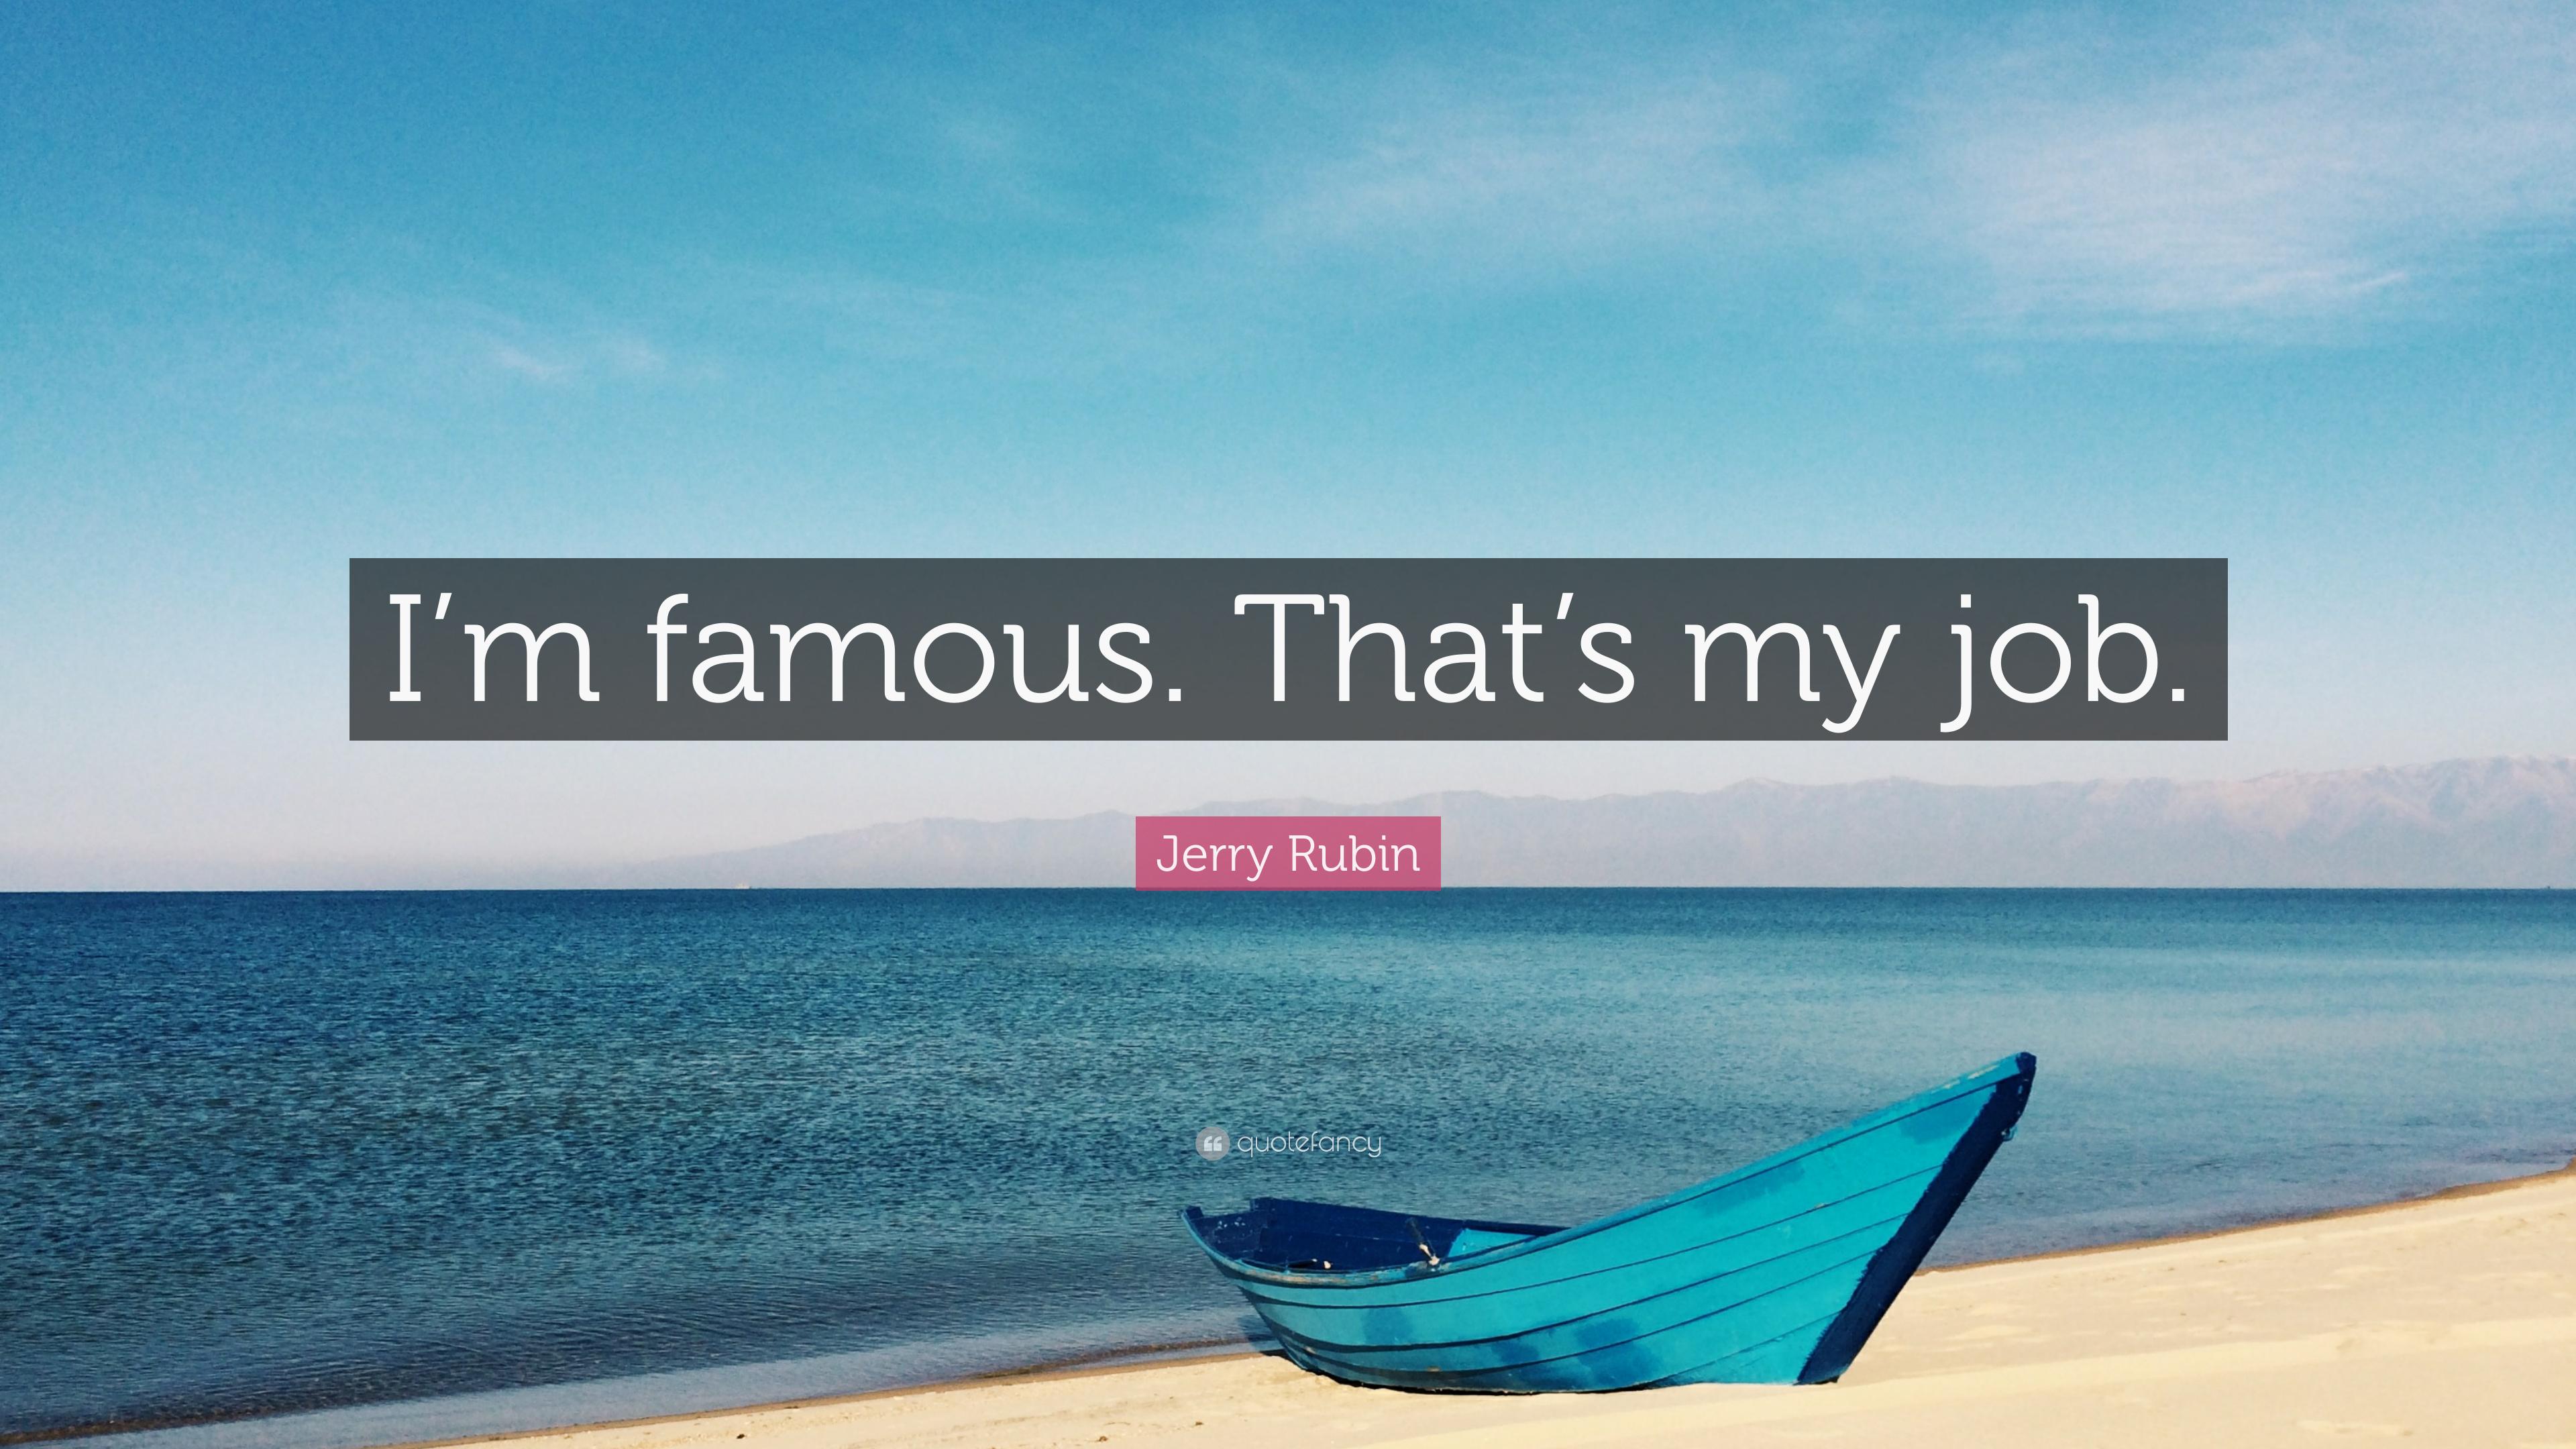 Jerry Rubin Quote: “I'm famous. That's my job.” 7 wallpaper